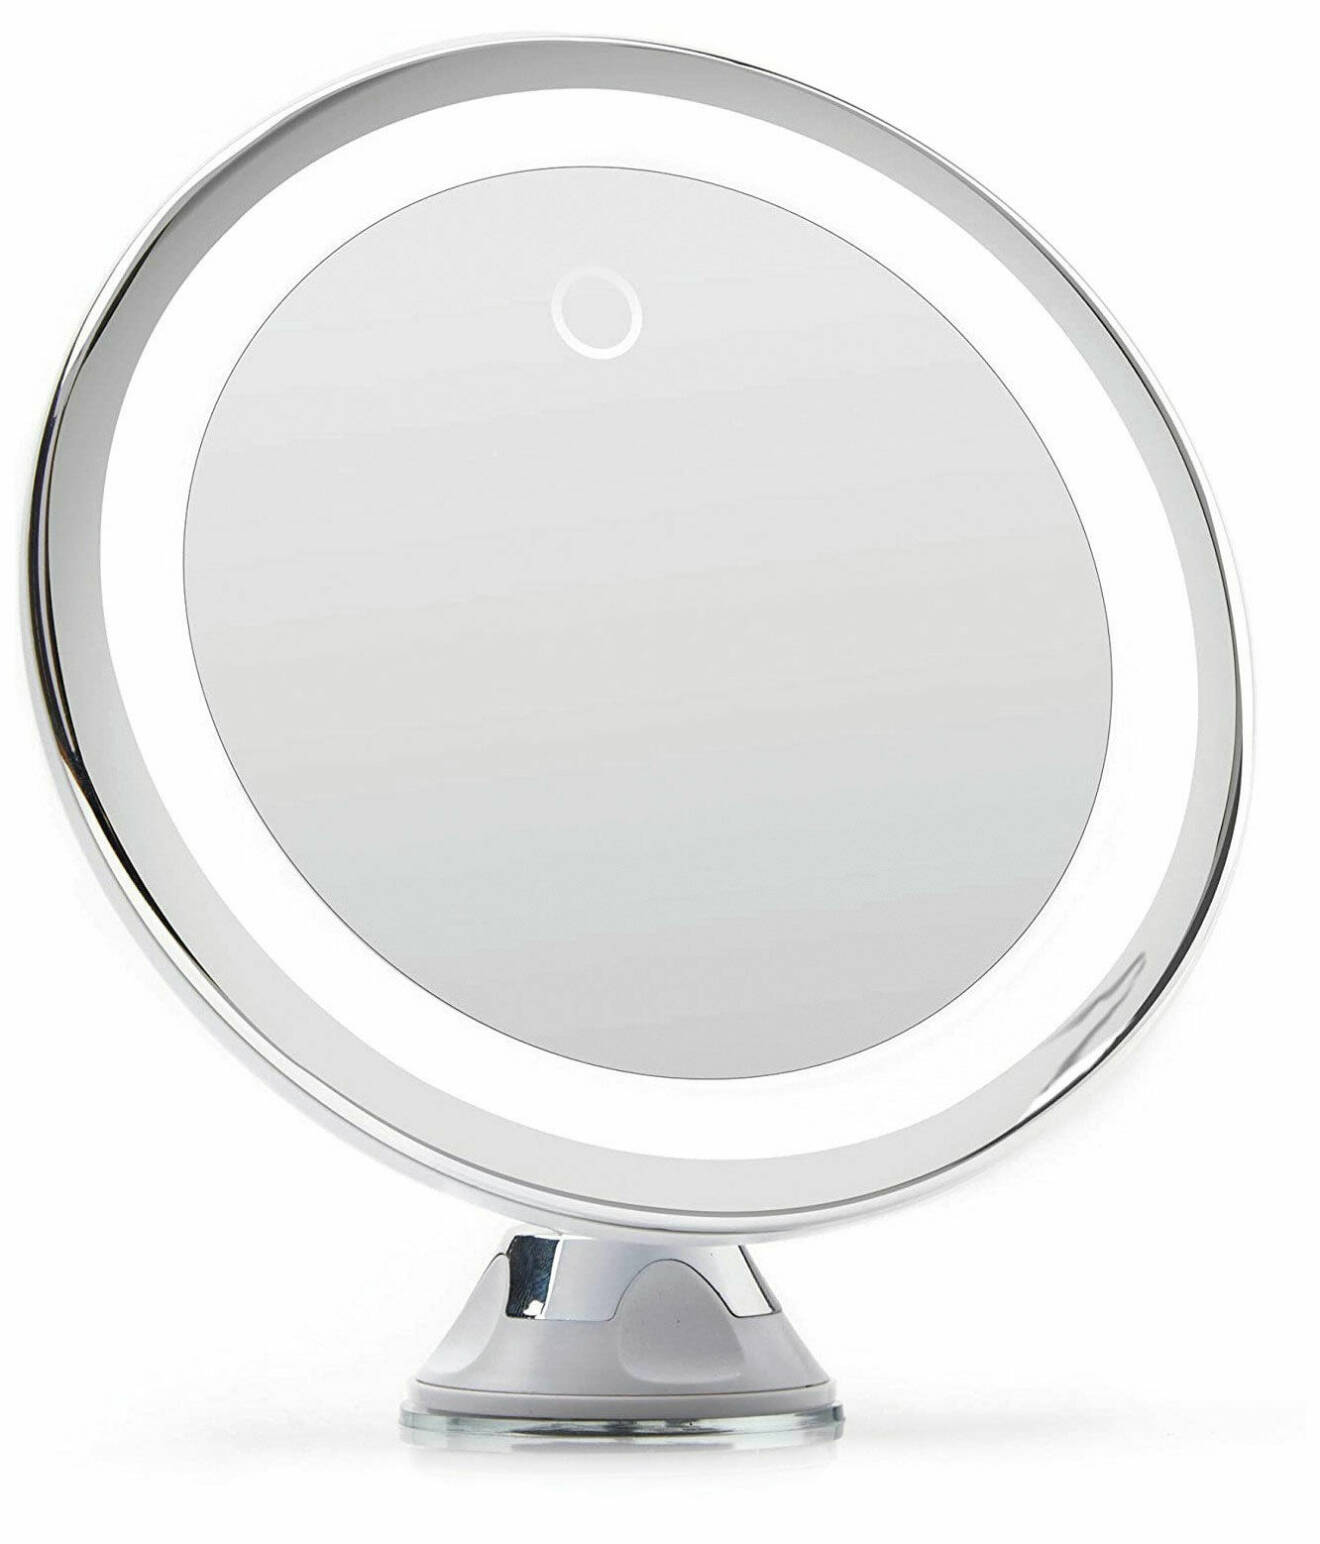 Signature Suction Mirror 10x Large från Browgames.